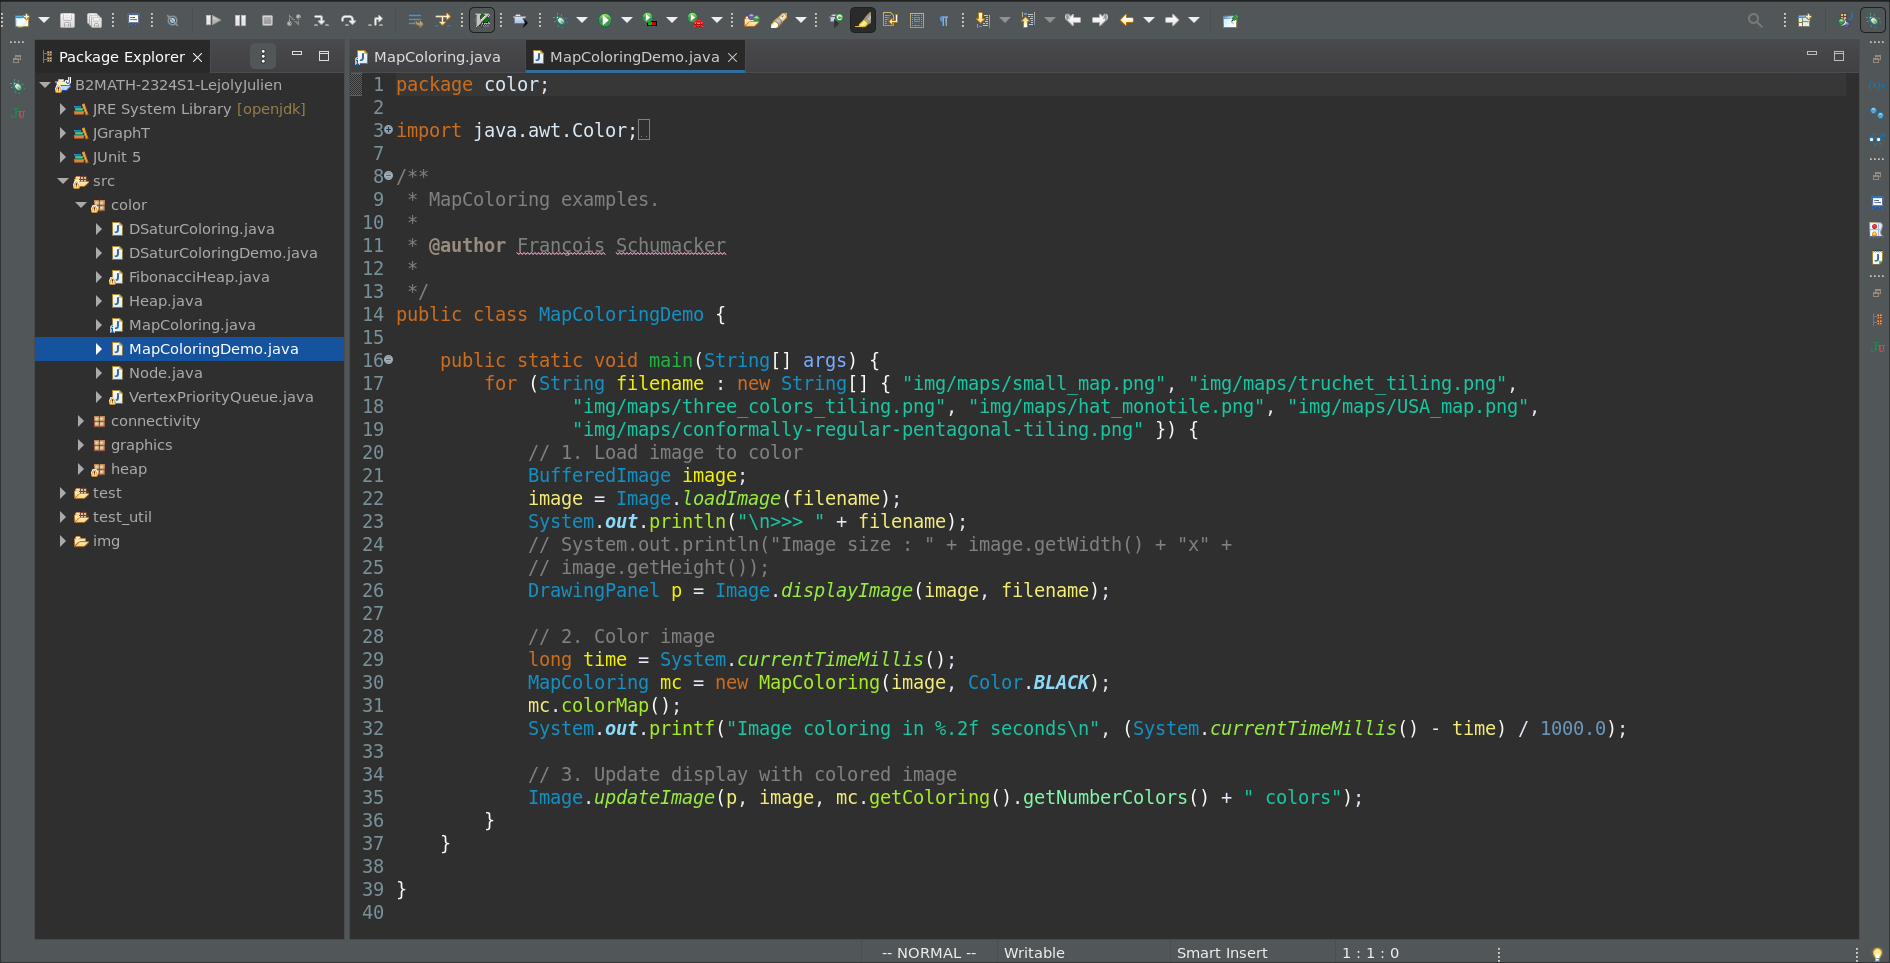 A screenshot of the default look of Eclipse IDE